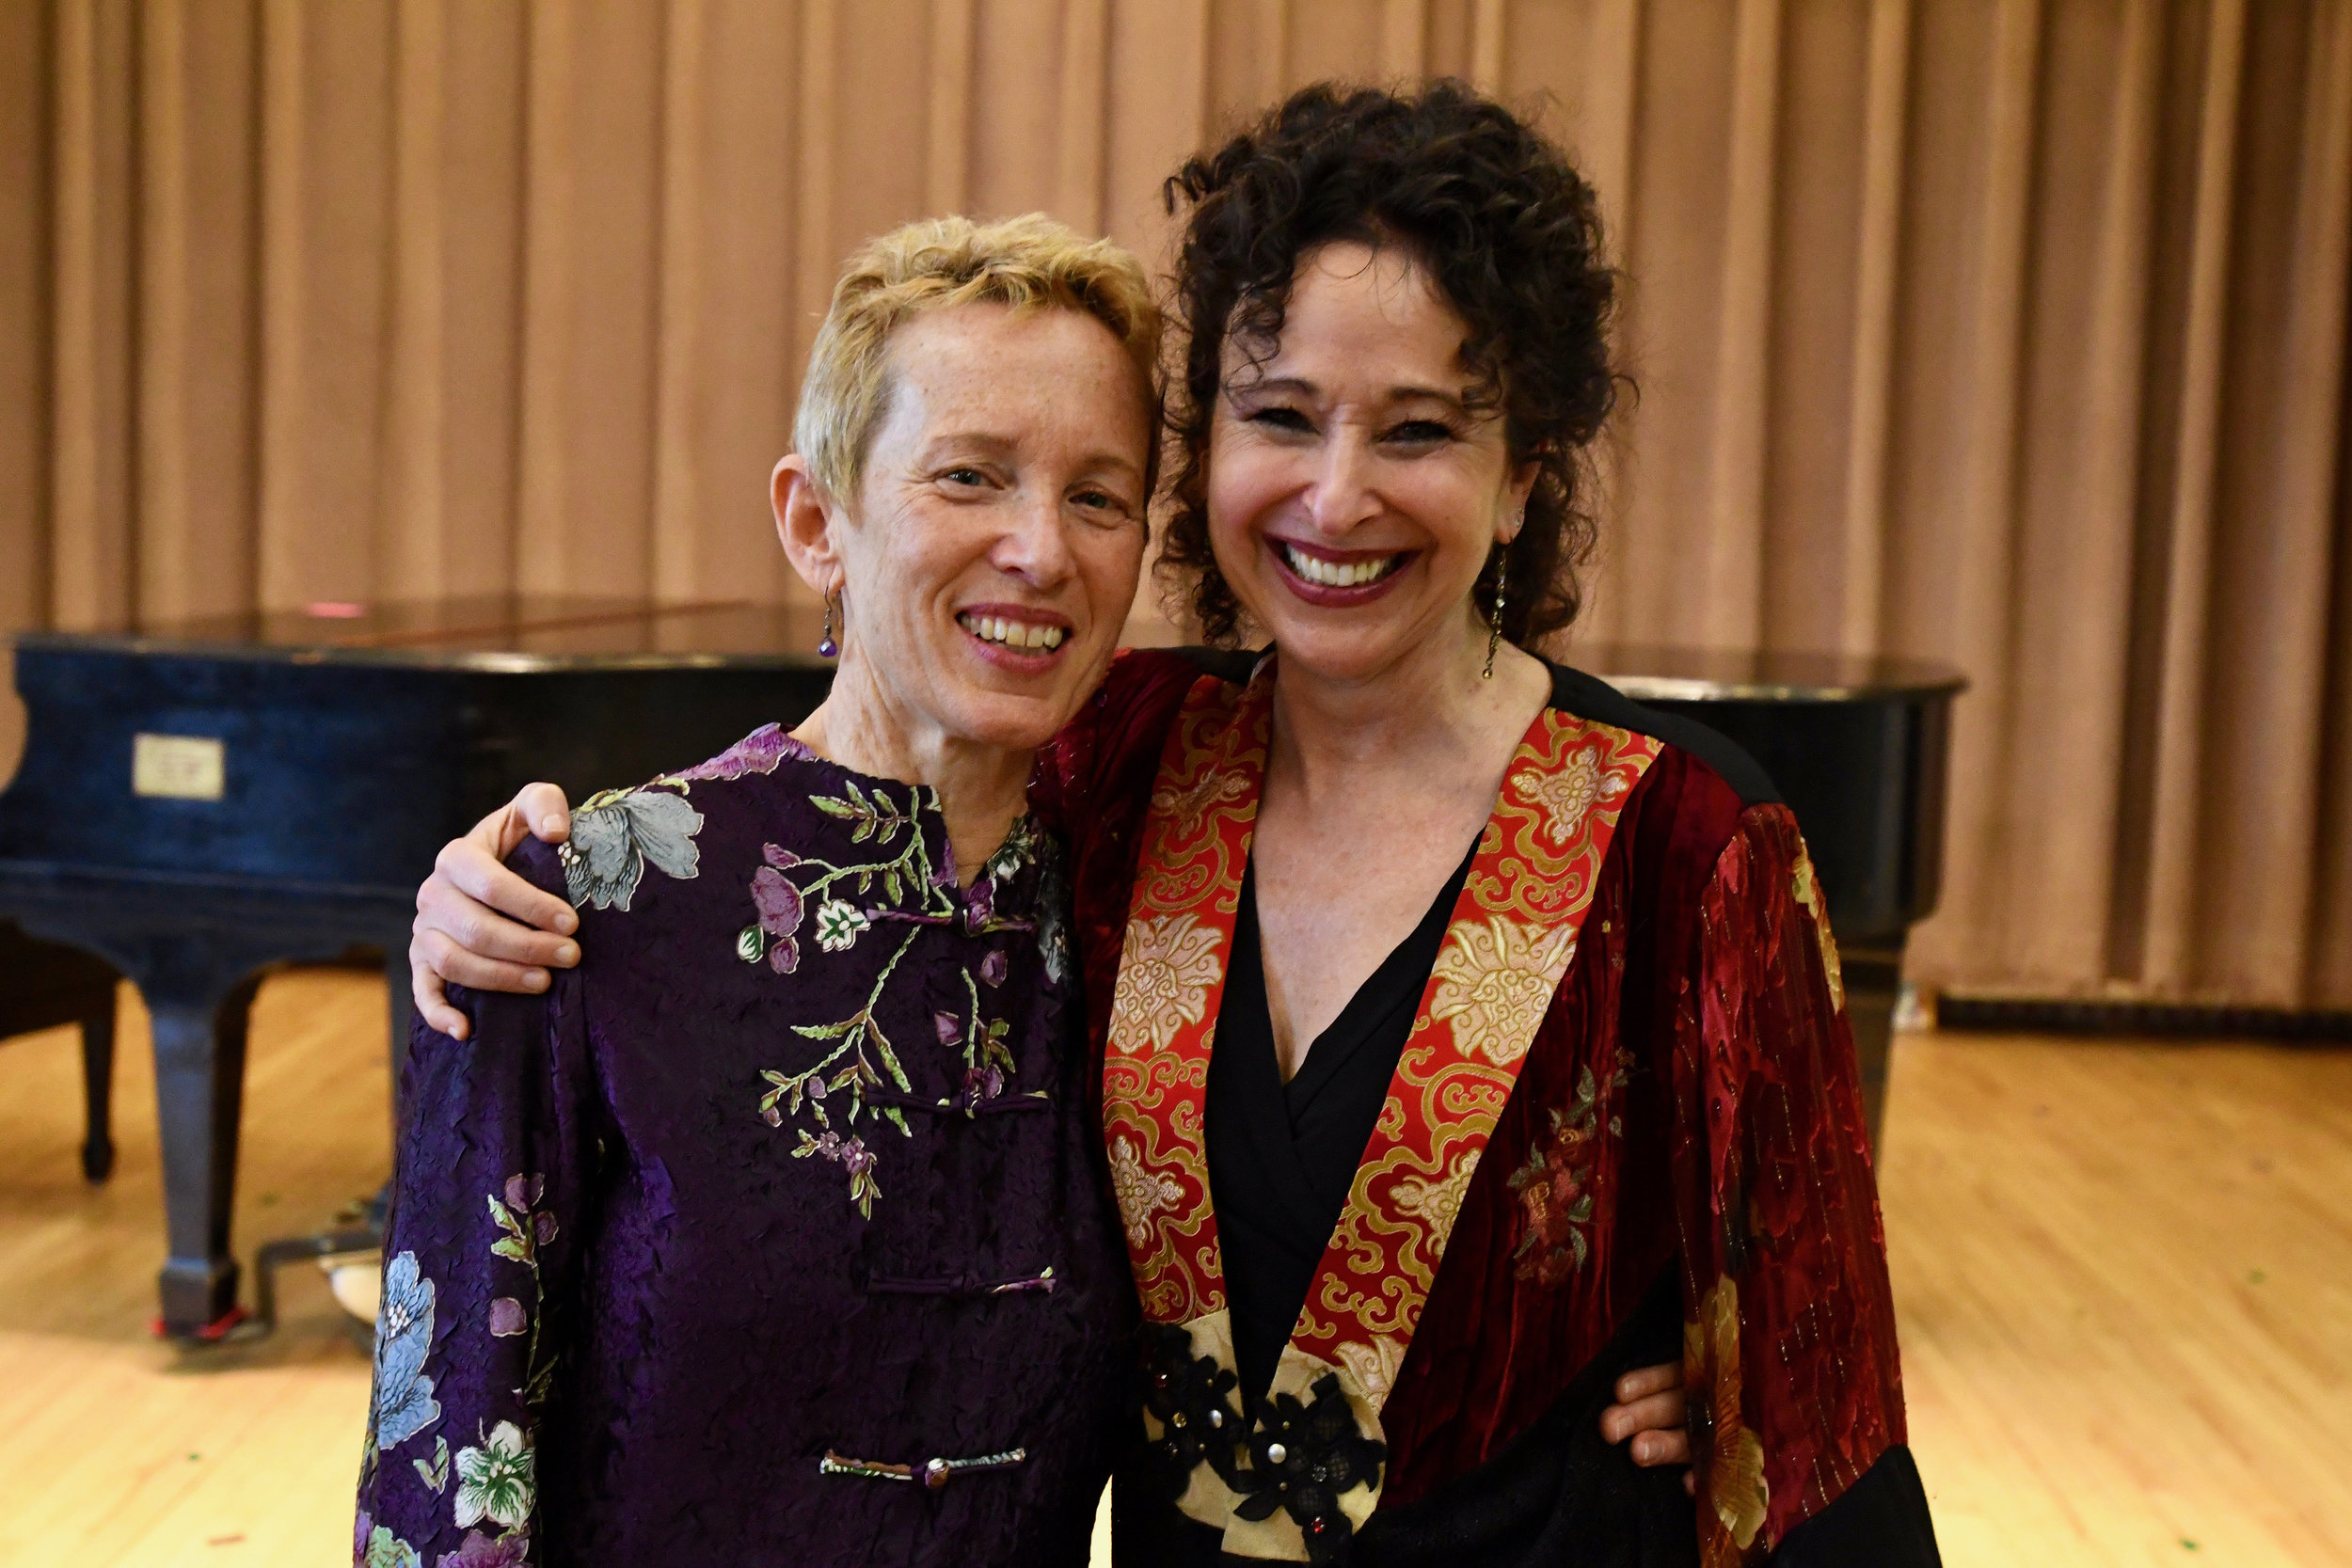  Linda Reichert and Andrea Clearfield 